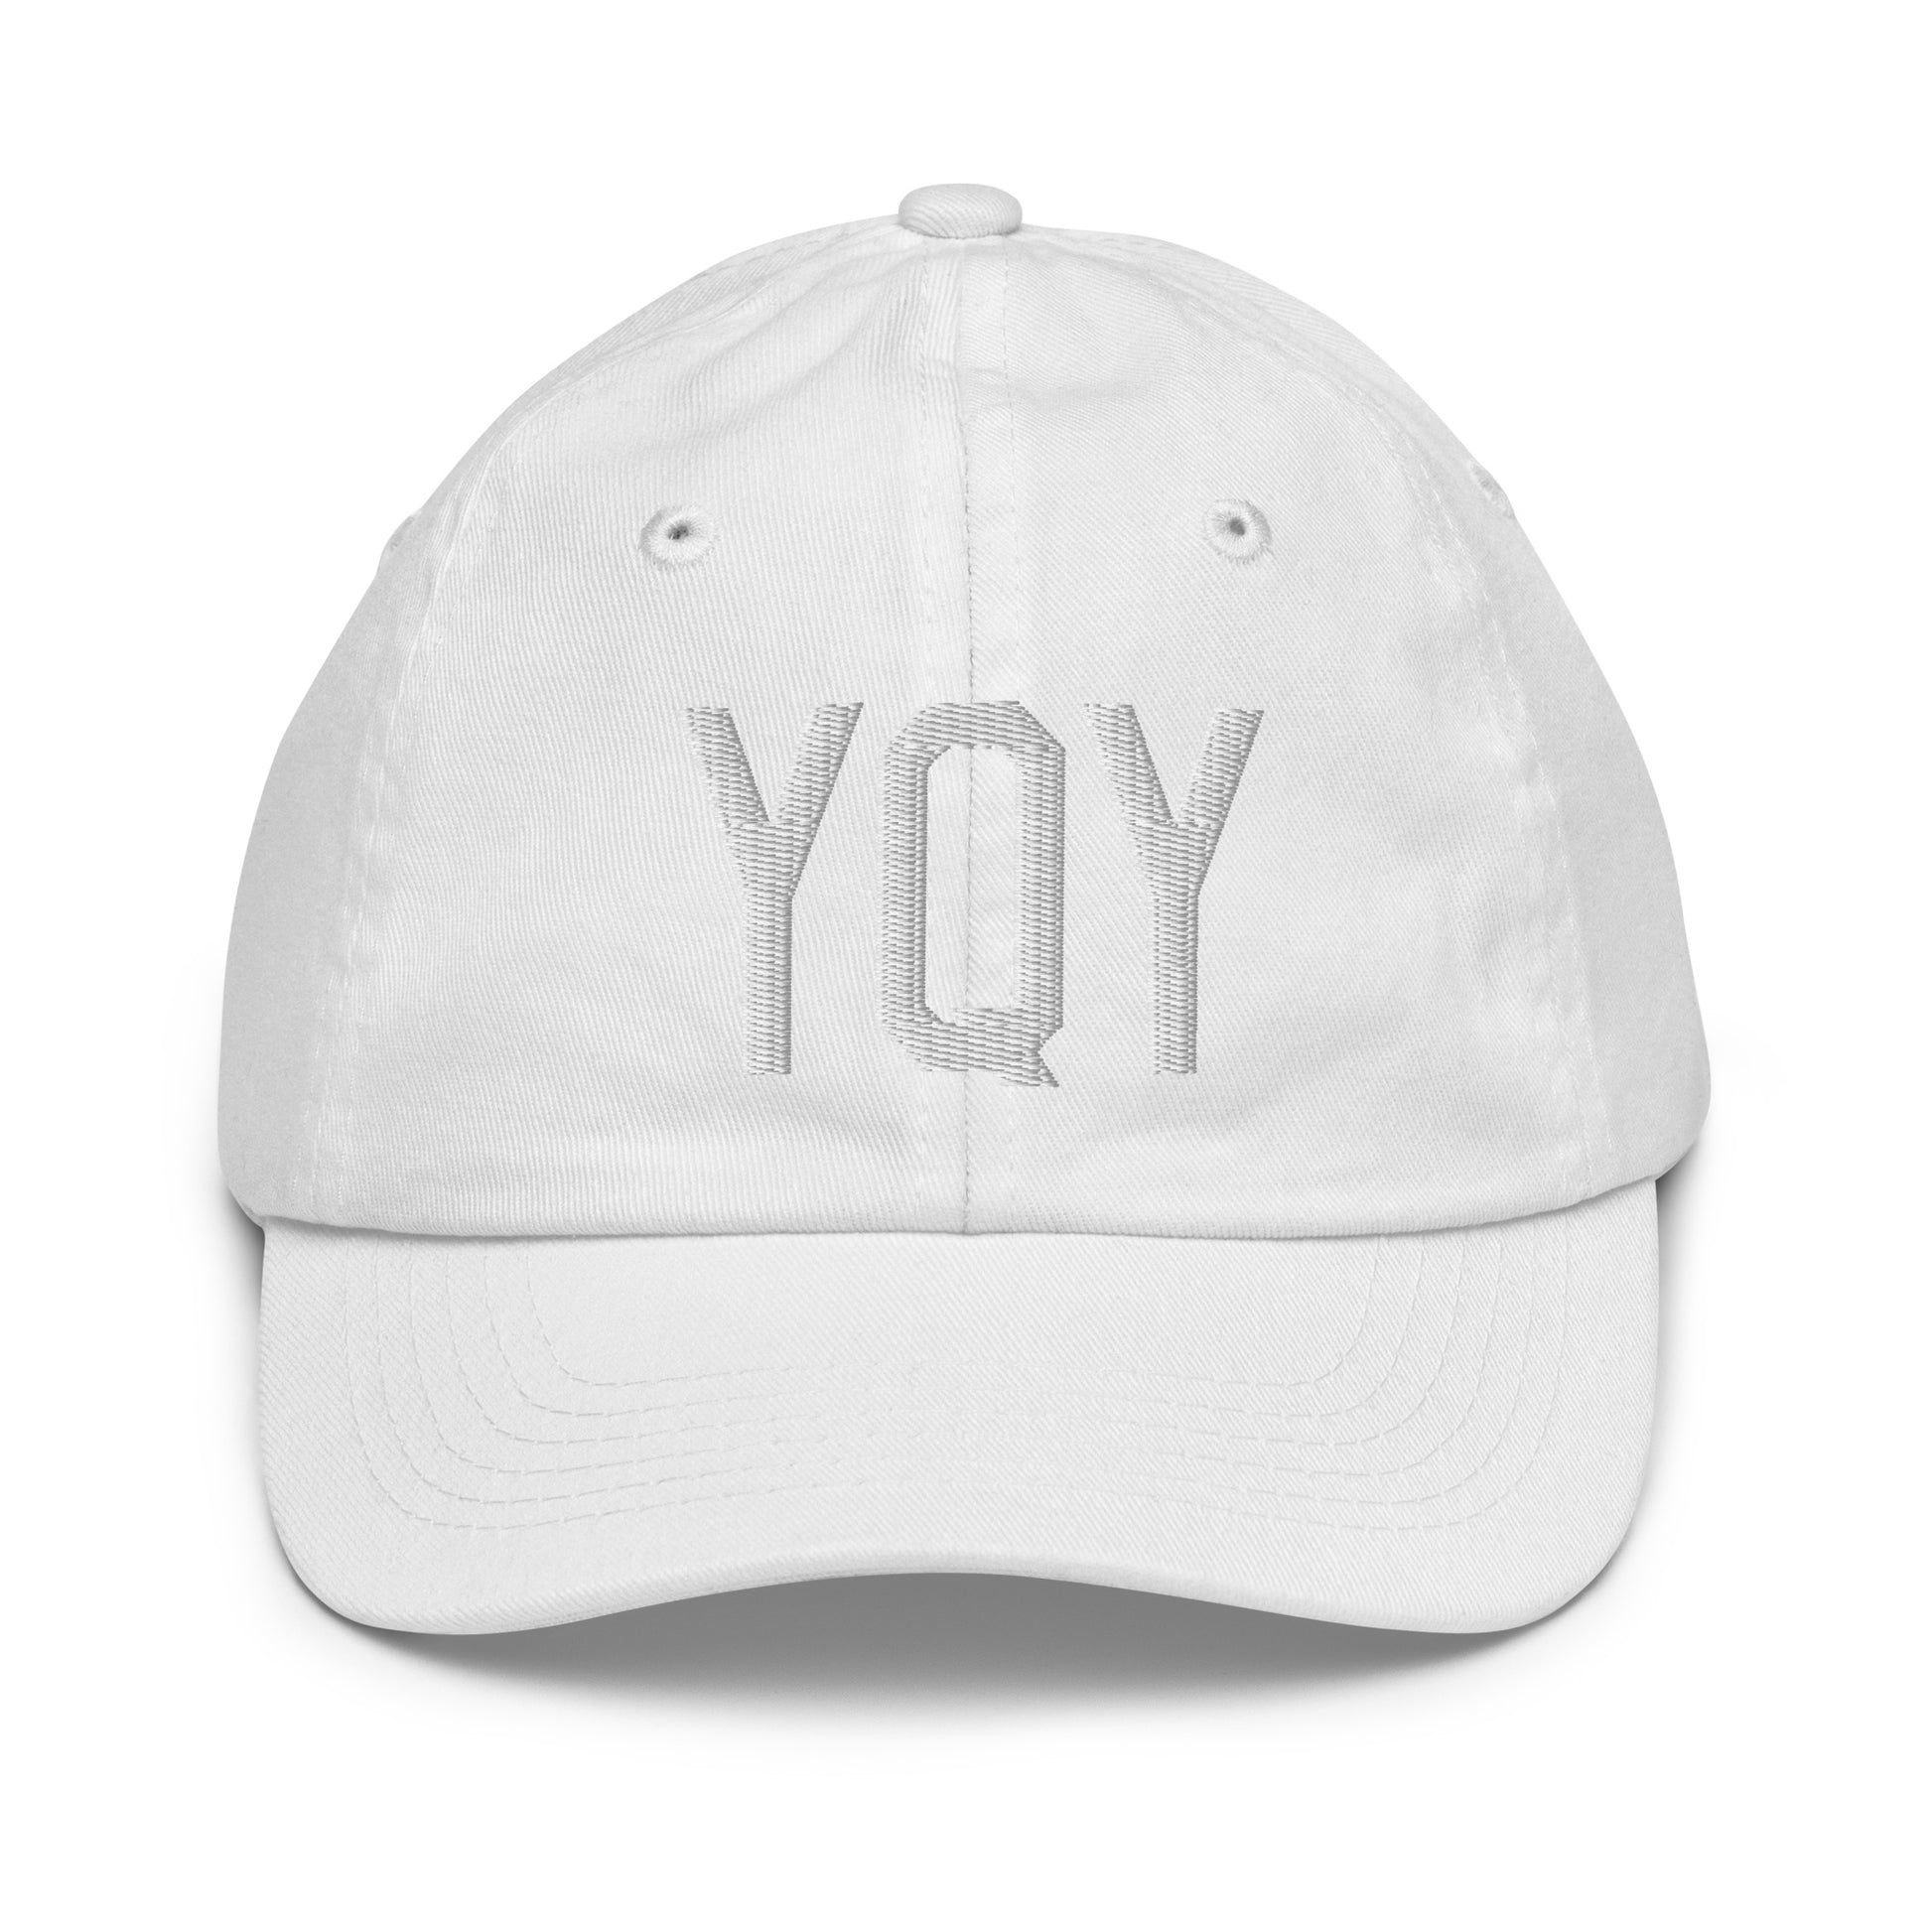 Airport Code Kid's Baseball Cap - White • YQY Sydney • YHM Designs - Image 34